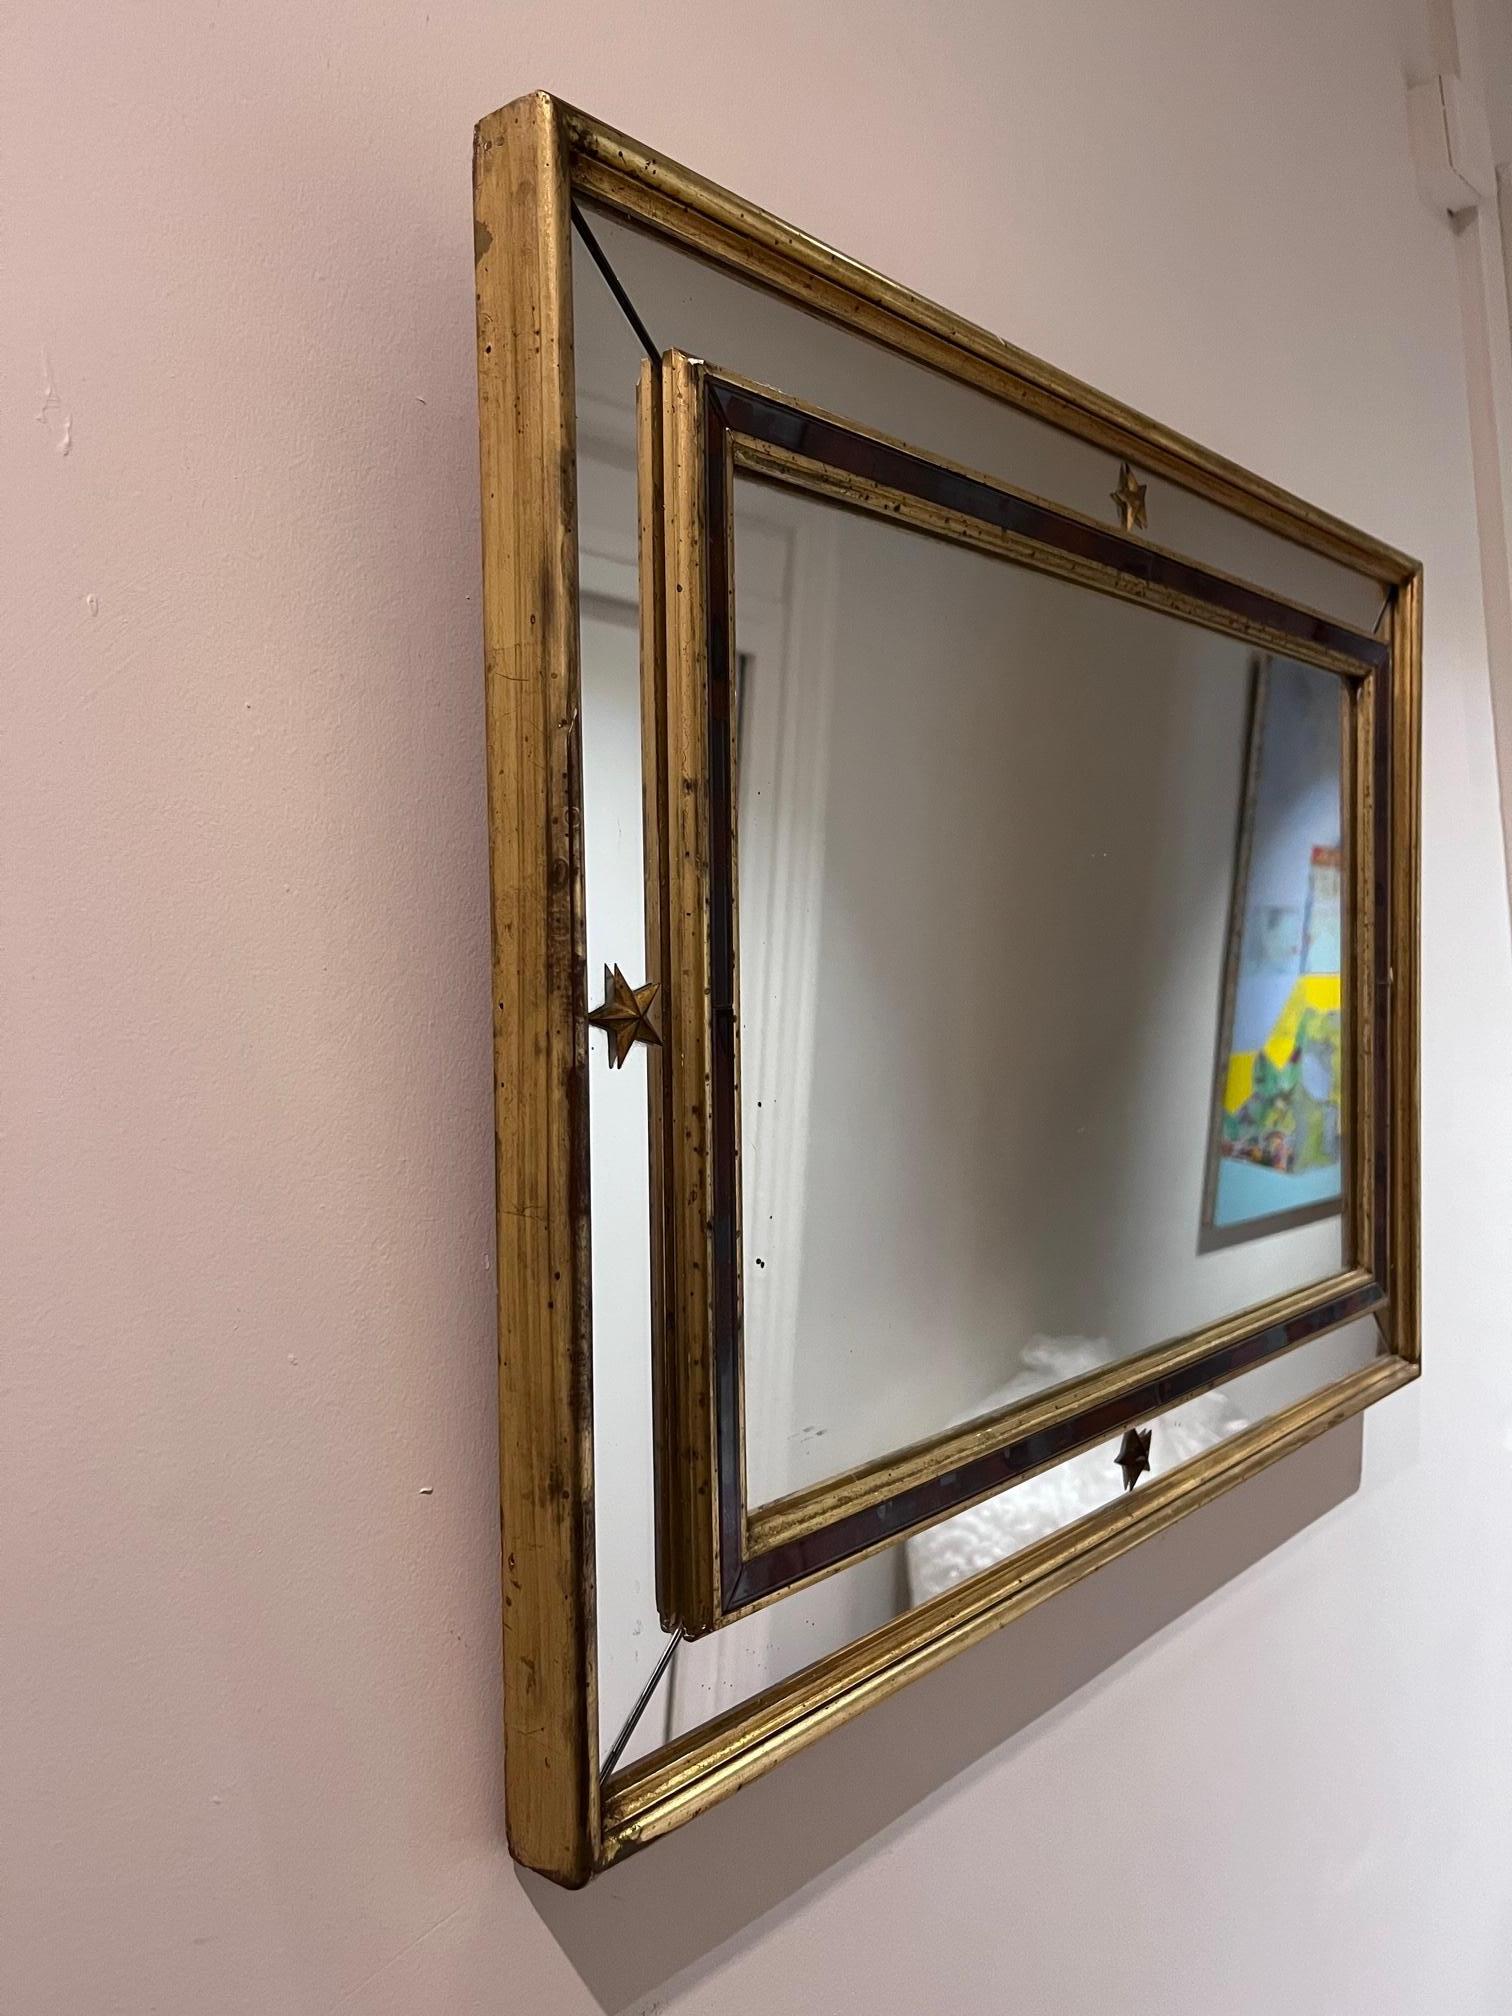 Pierre Lardin wall mirror with a gilt wood frame ornamented with brass stars circa 1940's
Pierre Lardin born January 14, 1902 and died in August 1982 in Paris is a French glass artist, one of the most famous of the post-war period with Max Ingrand